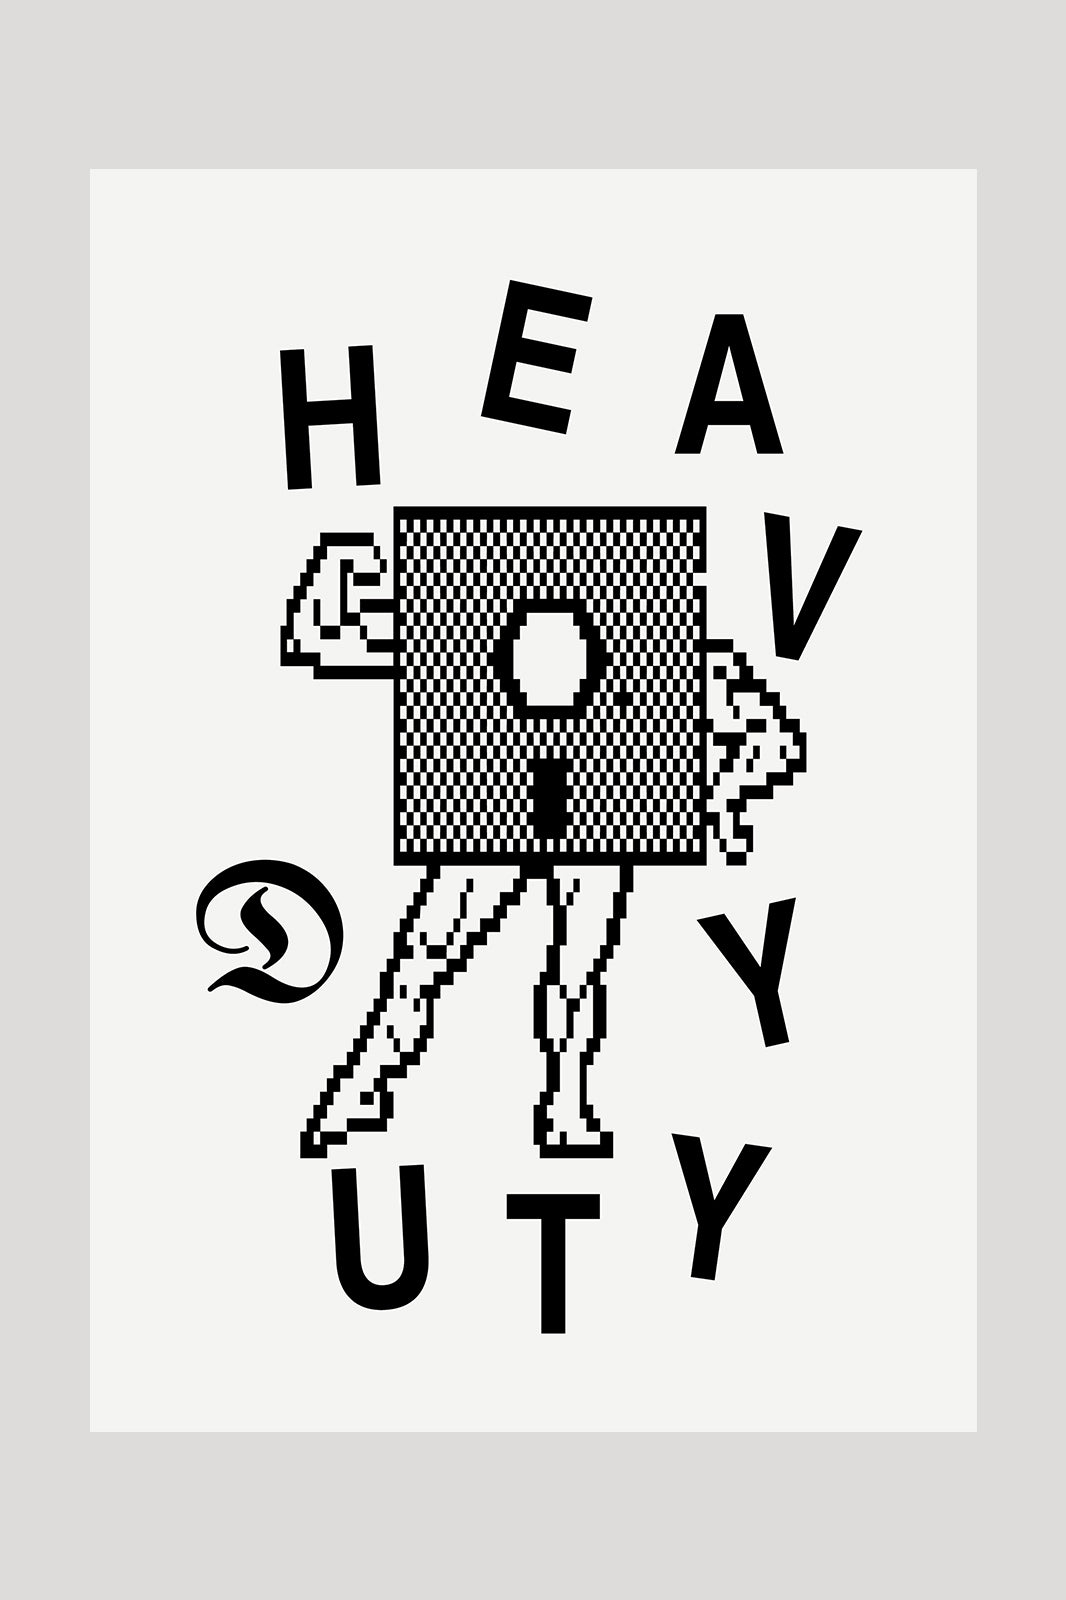 Flat preview of the Duties Tuff print poster featuring a pixel illustration of a floppy disc with arms and legs, as well as text saying 'HEAVY DUTY'.